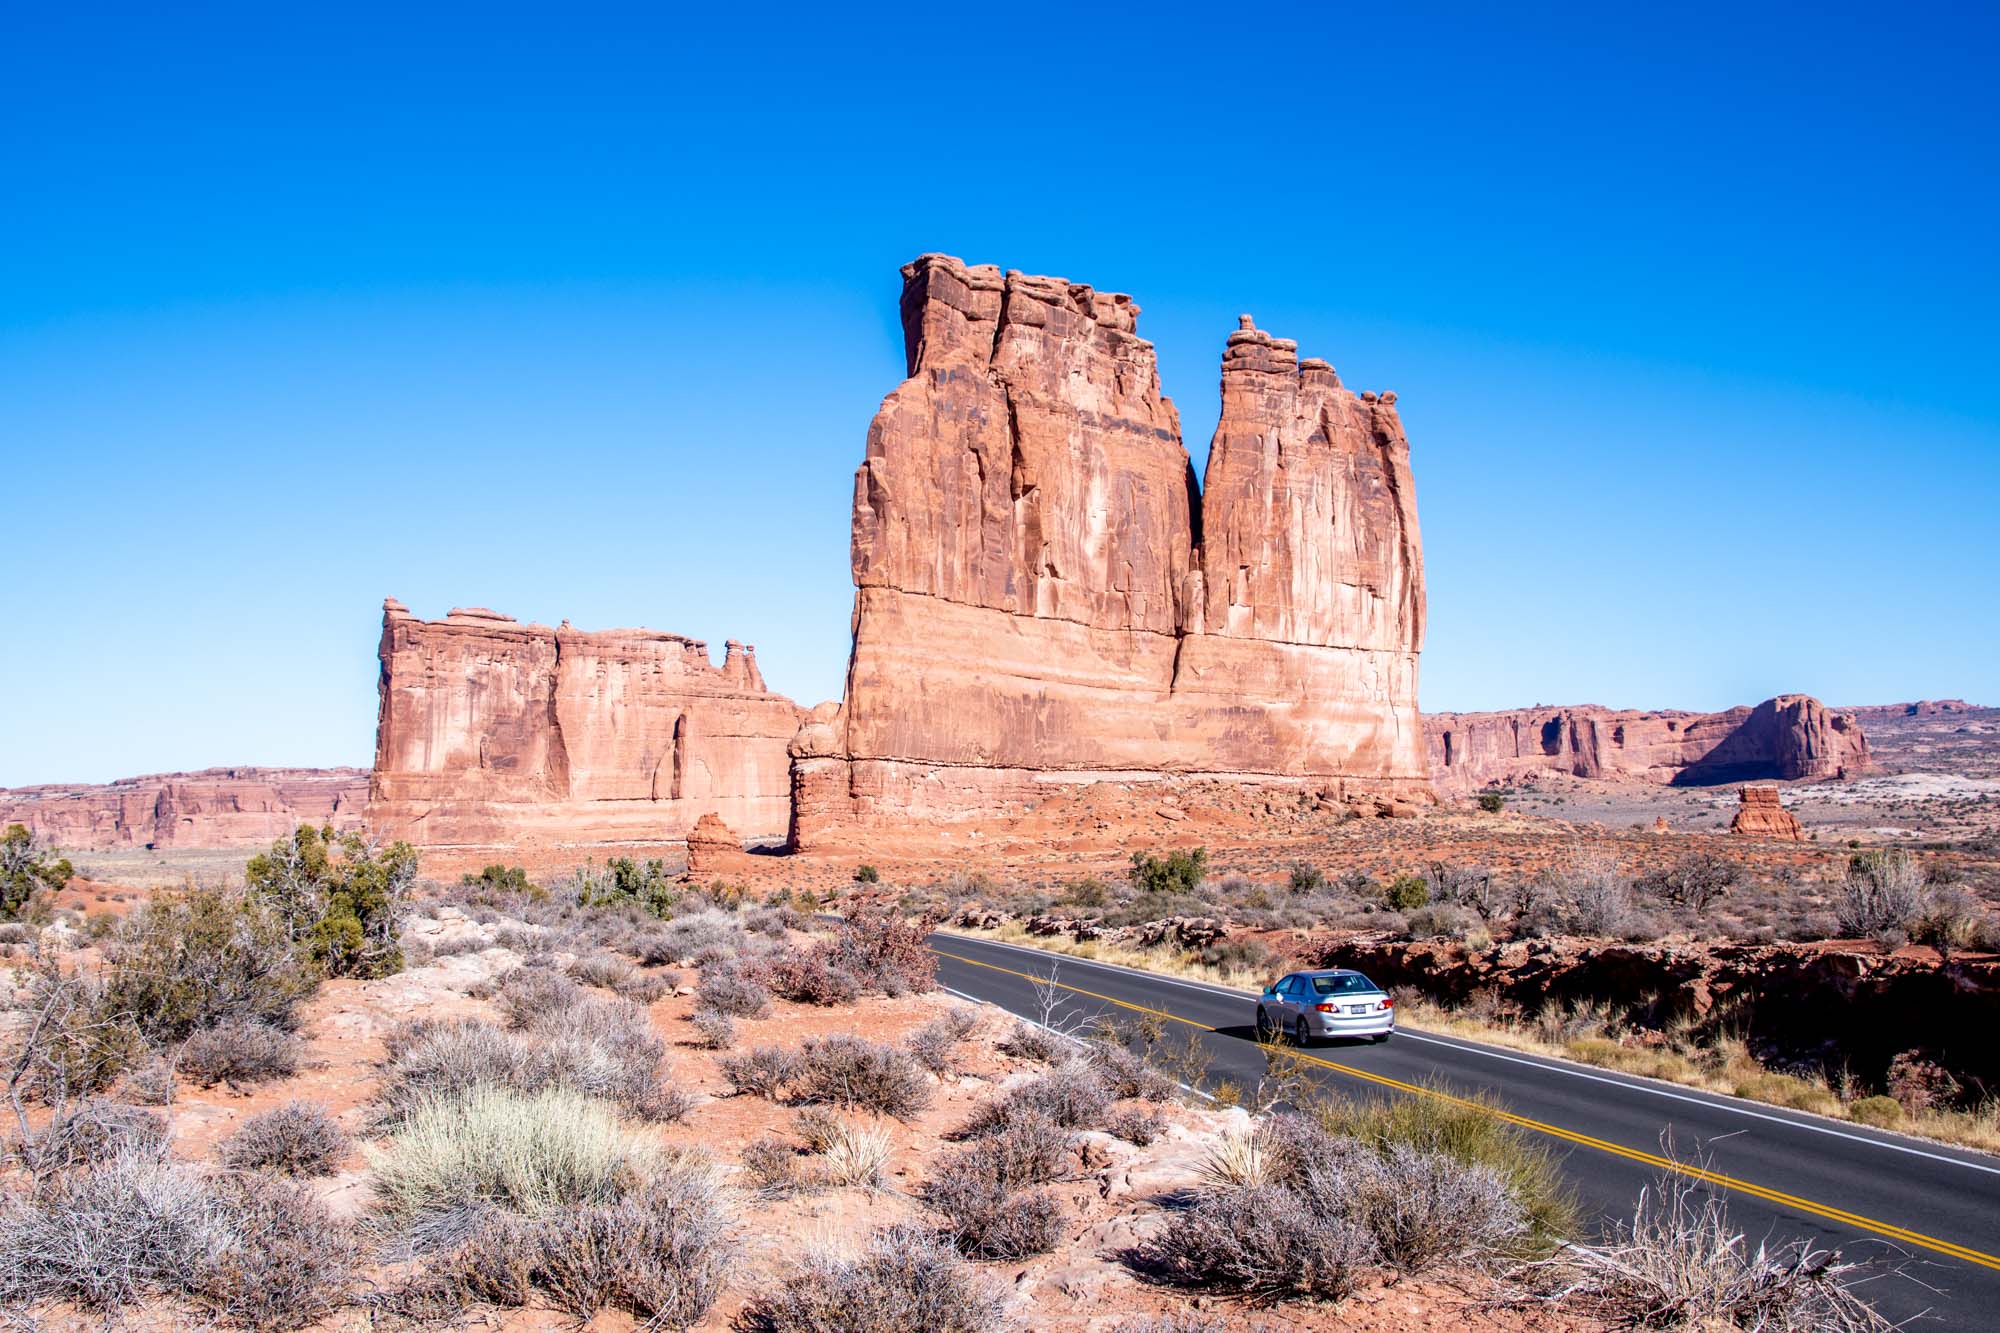 Car driving on road in front of Courthouse Towers rock formation